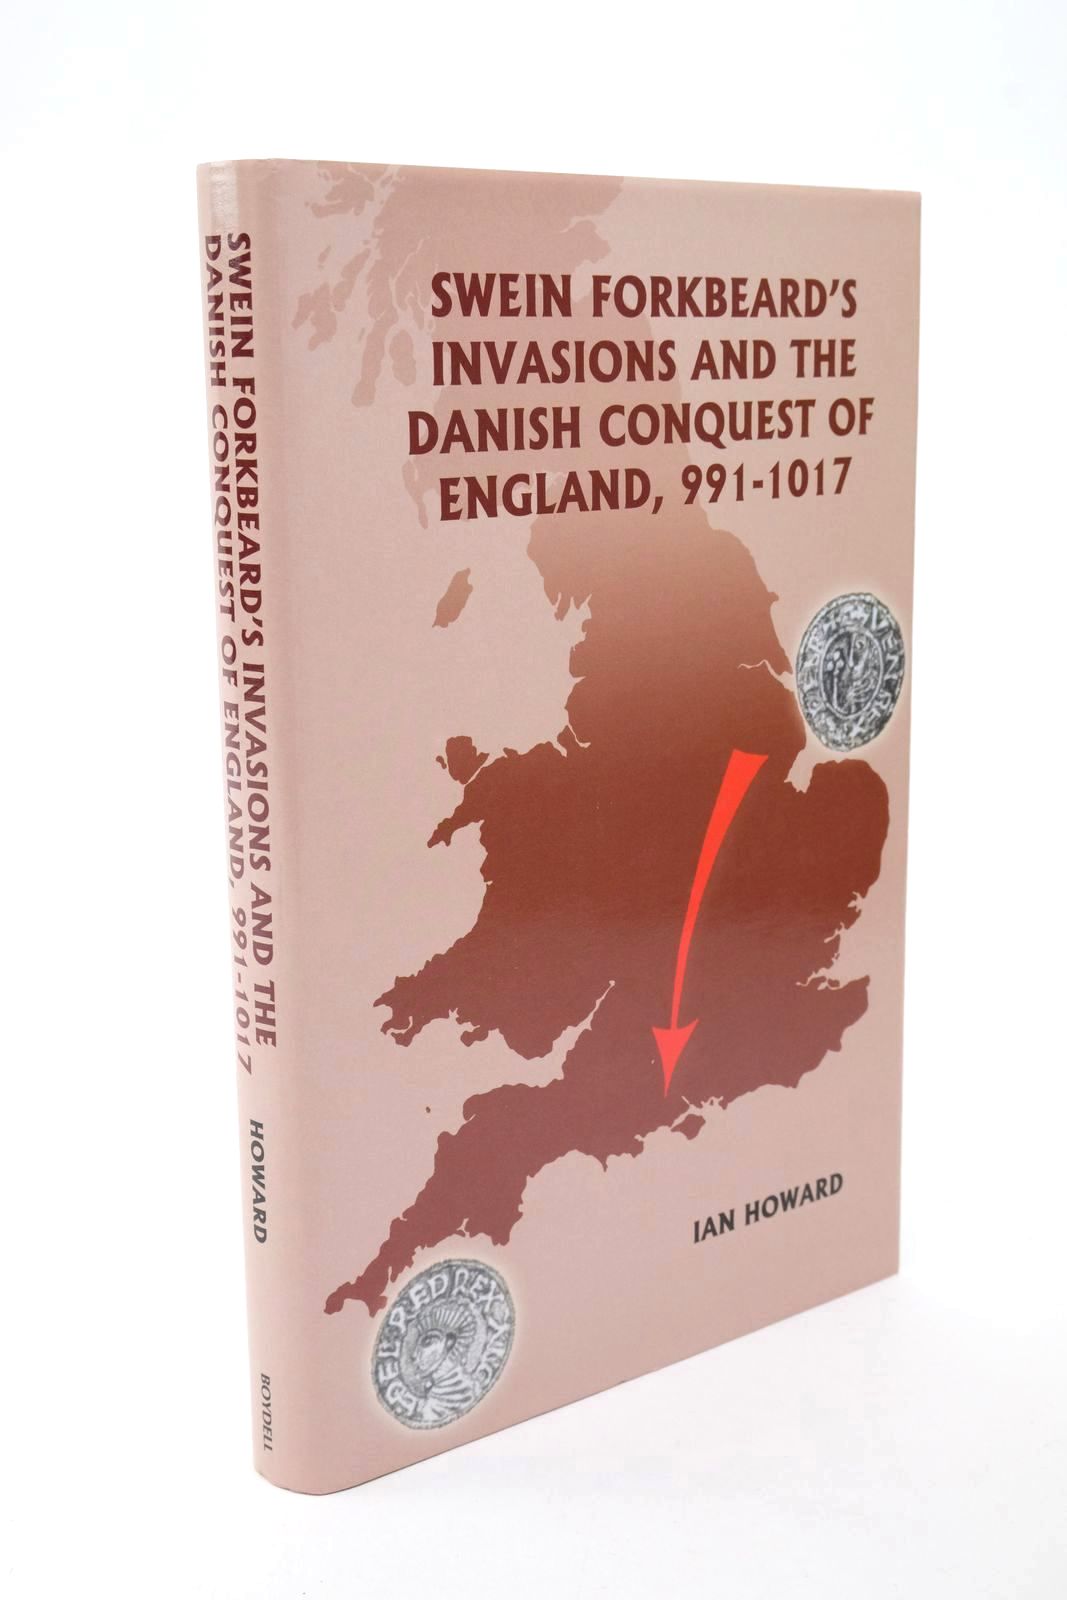 Photo of SWEIN FORKBEARD'S INVASIONS AND THE DANISH CONQUEST OF ENGLAND, 991-1017- Stock Number: 1322610